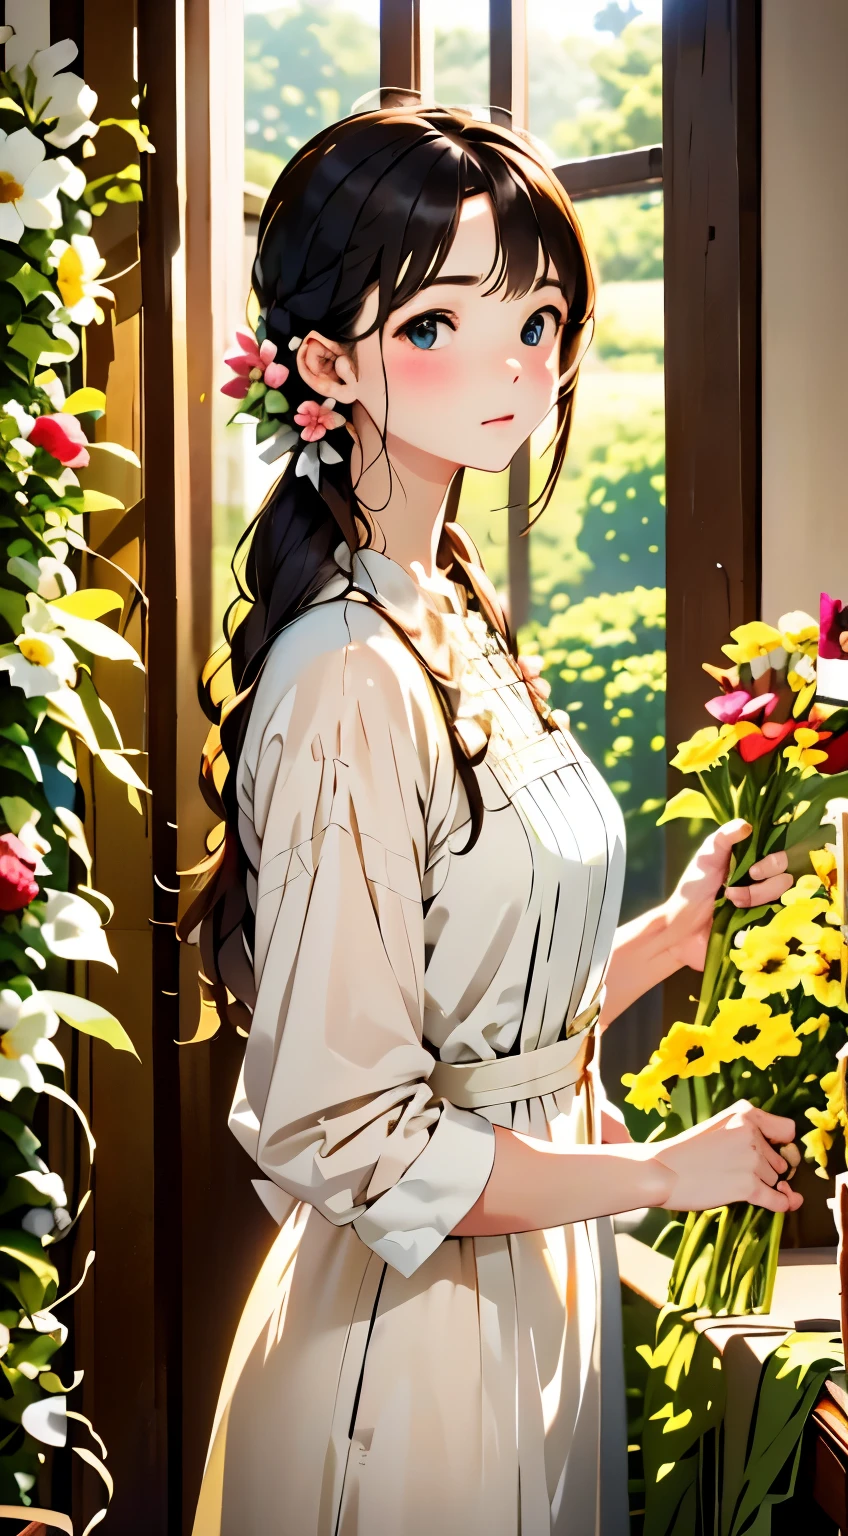 anime style、(((woman working at a flower shop、beautiful flower々:1.2、lots of flowers:1.2、flower garden flower shop:1.2)))、Gypsophila、Cat clerk、beckoning cat、cute face、small nose、plump lips、carefully tied braids、cute、clerk serving customers、Blue front cover:1.2、Natural light、(very detailed, intricate details), sharp focus, calm colors, 8k, confused, 8mm film grain